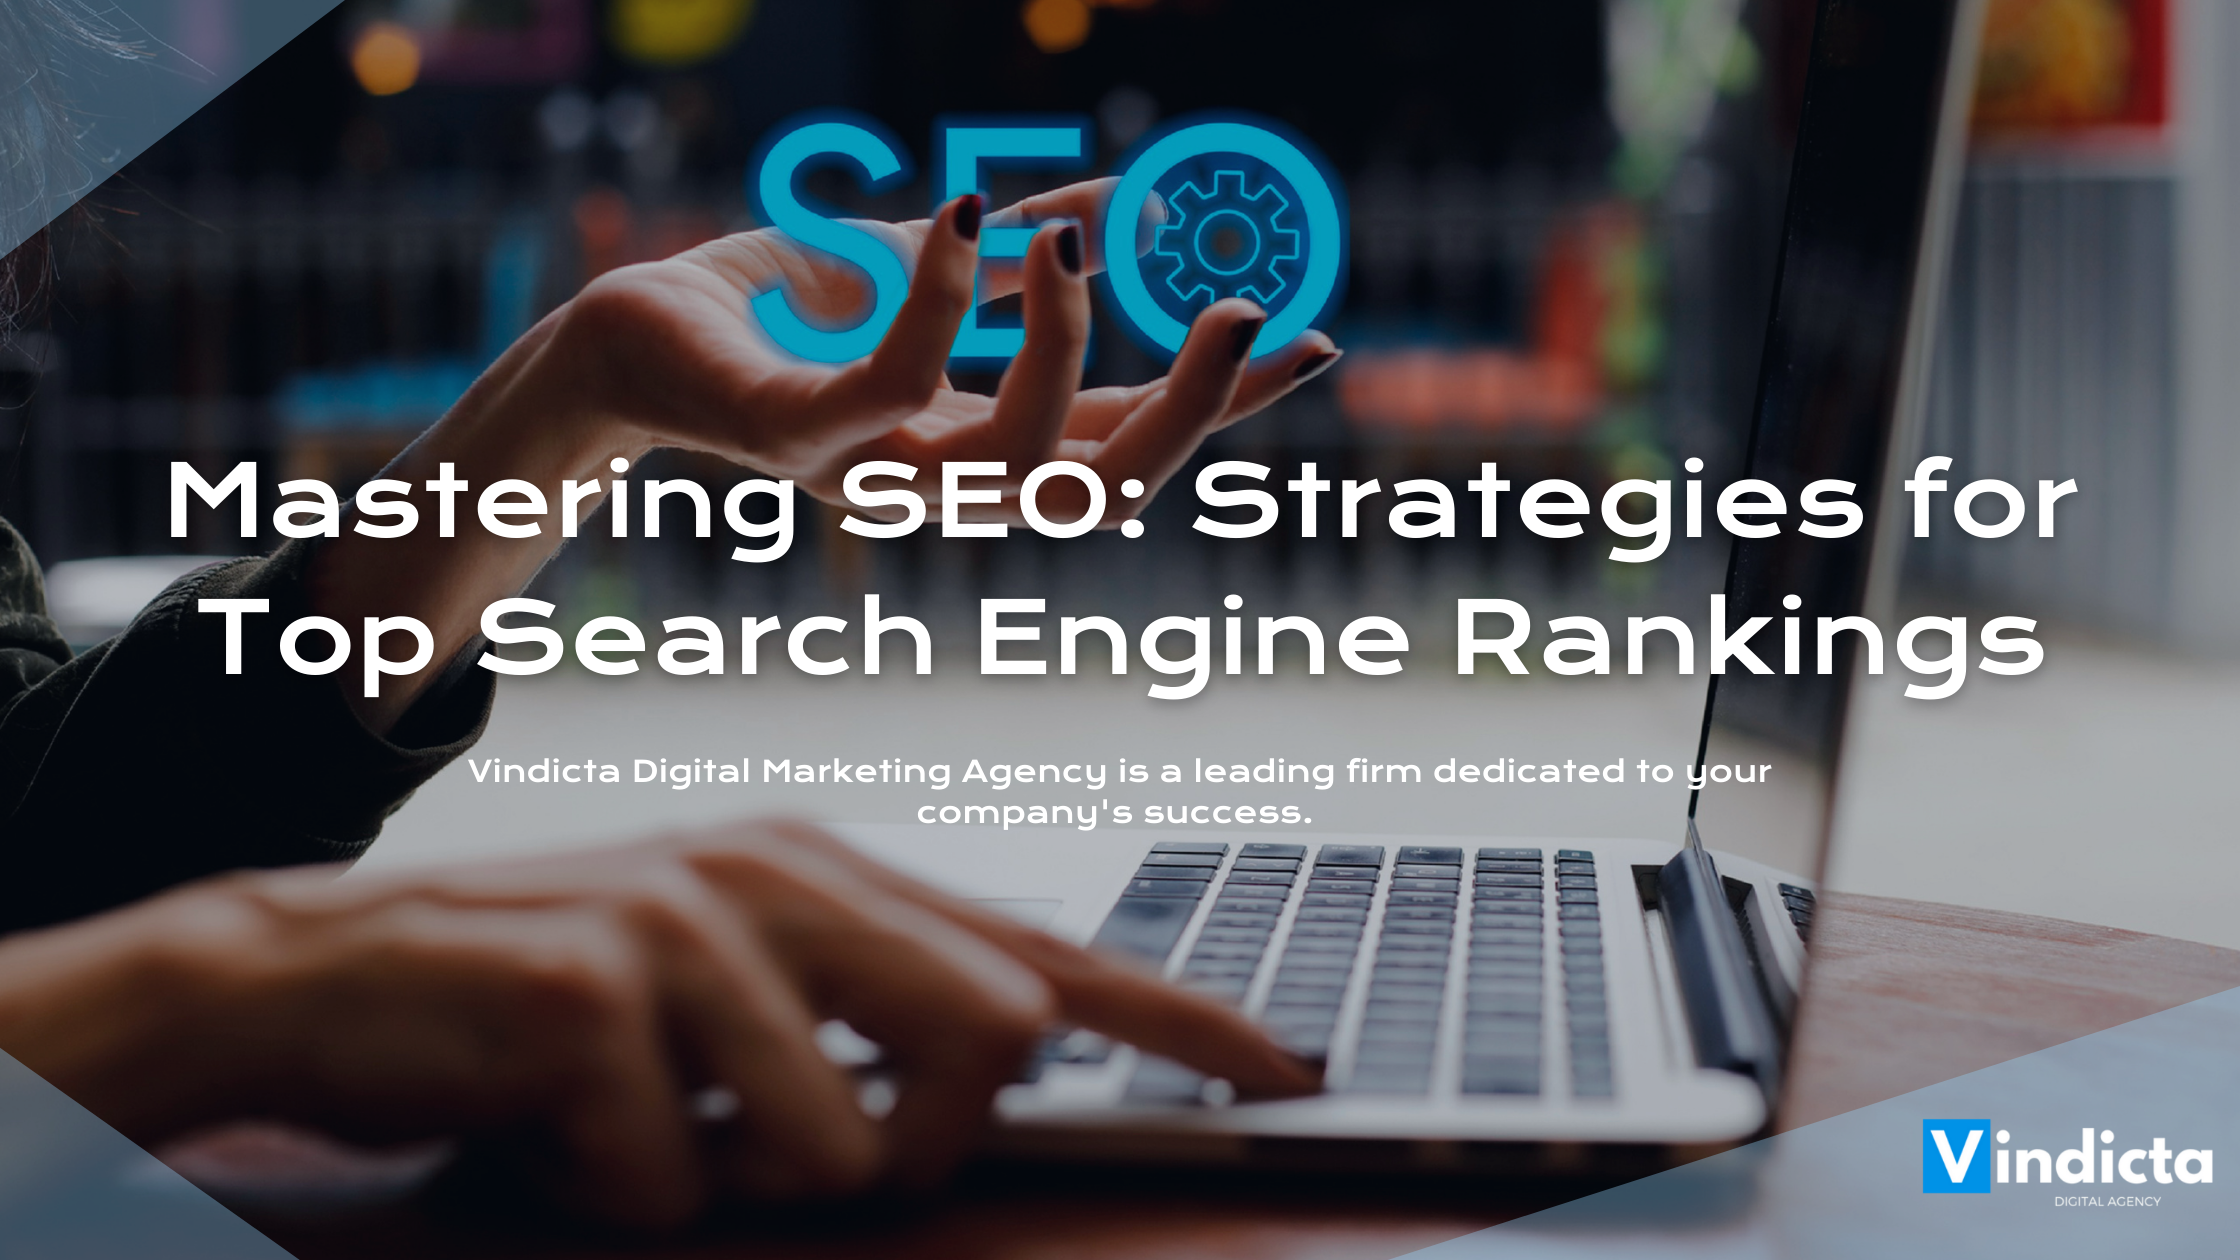 Mastering SEO: Strategies for Top Search Engine Rankings